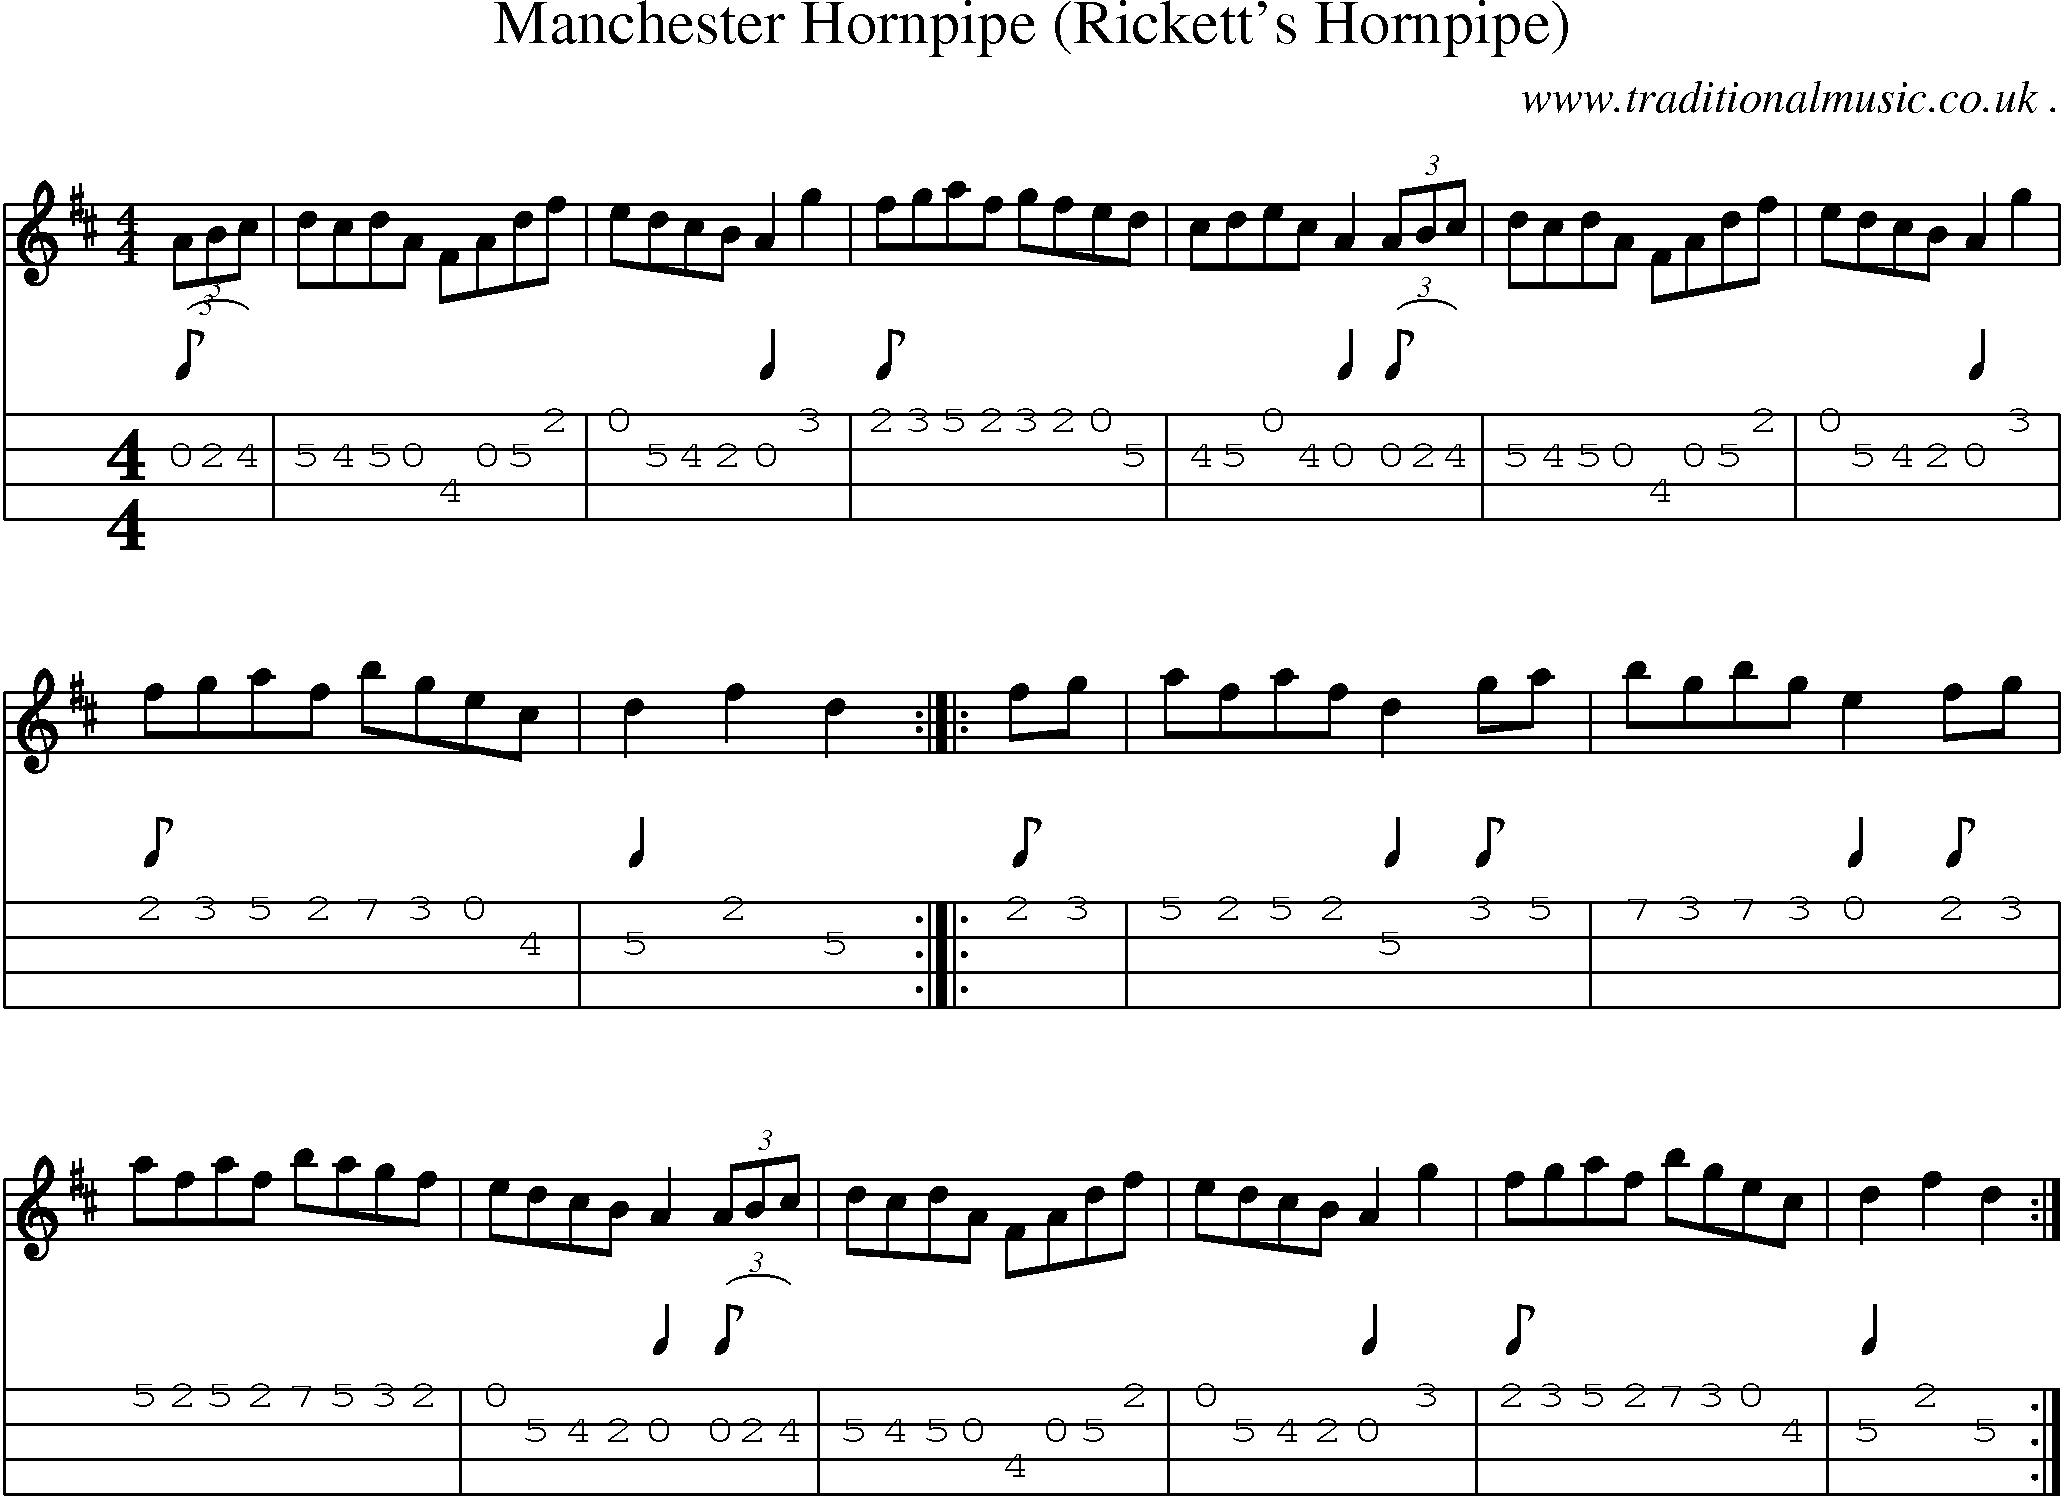 Sheet-Music and Mandolin Tabs for Manchester Hornpipe (ricketts Hornpipe)